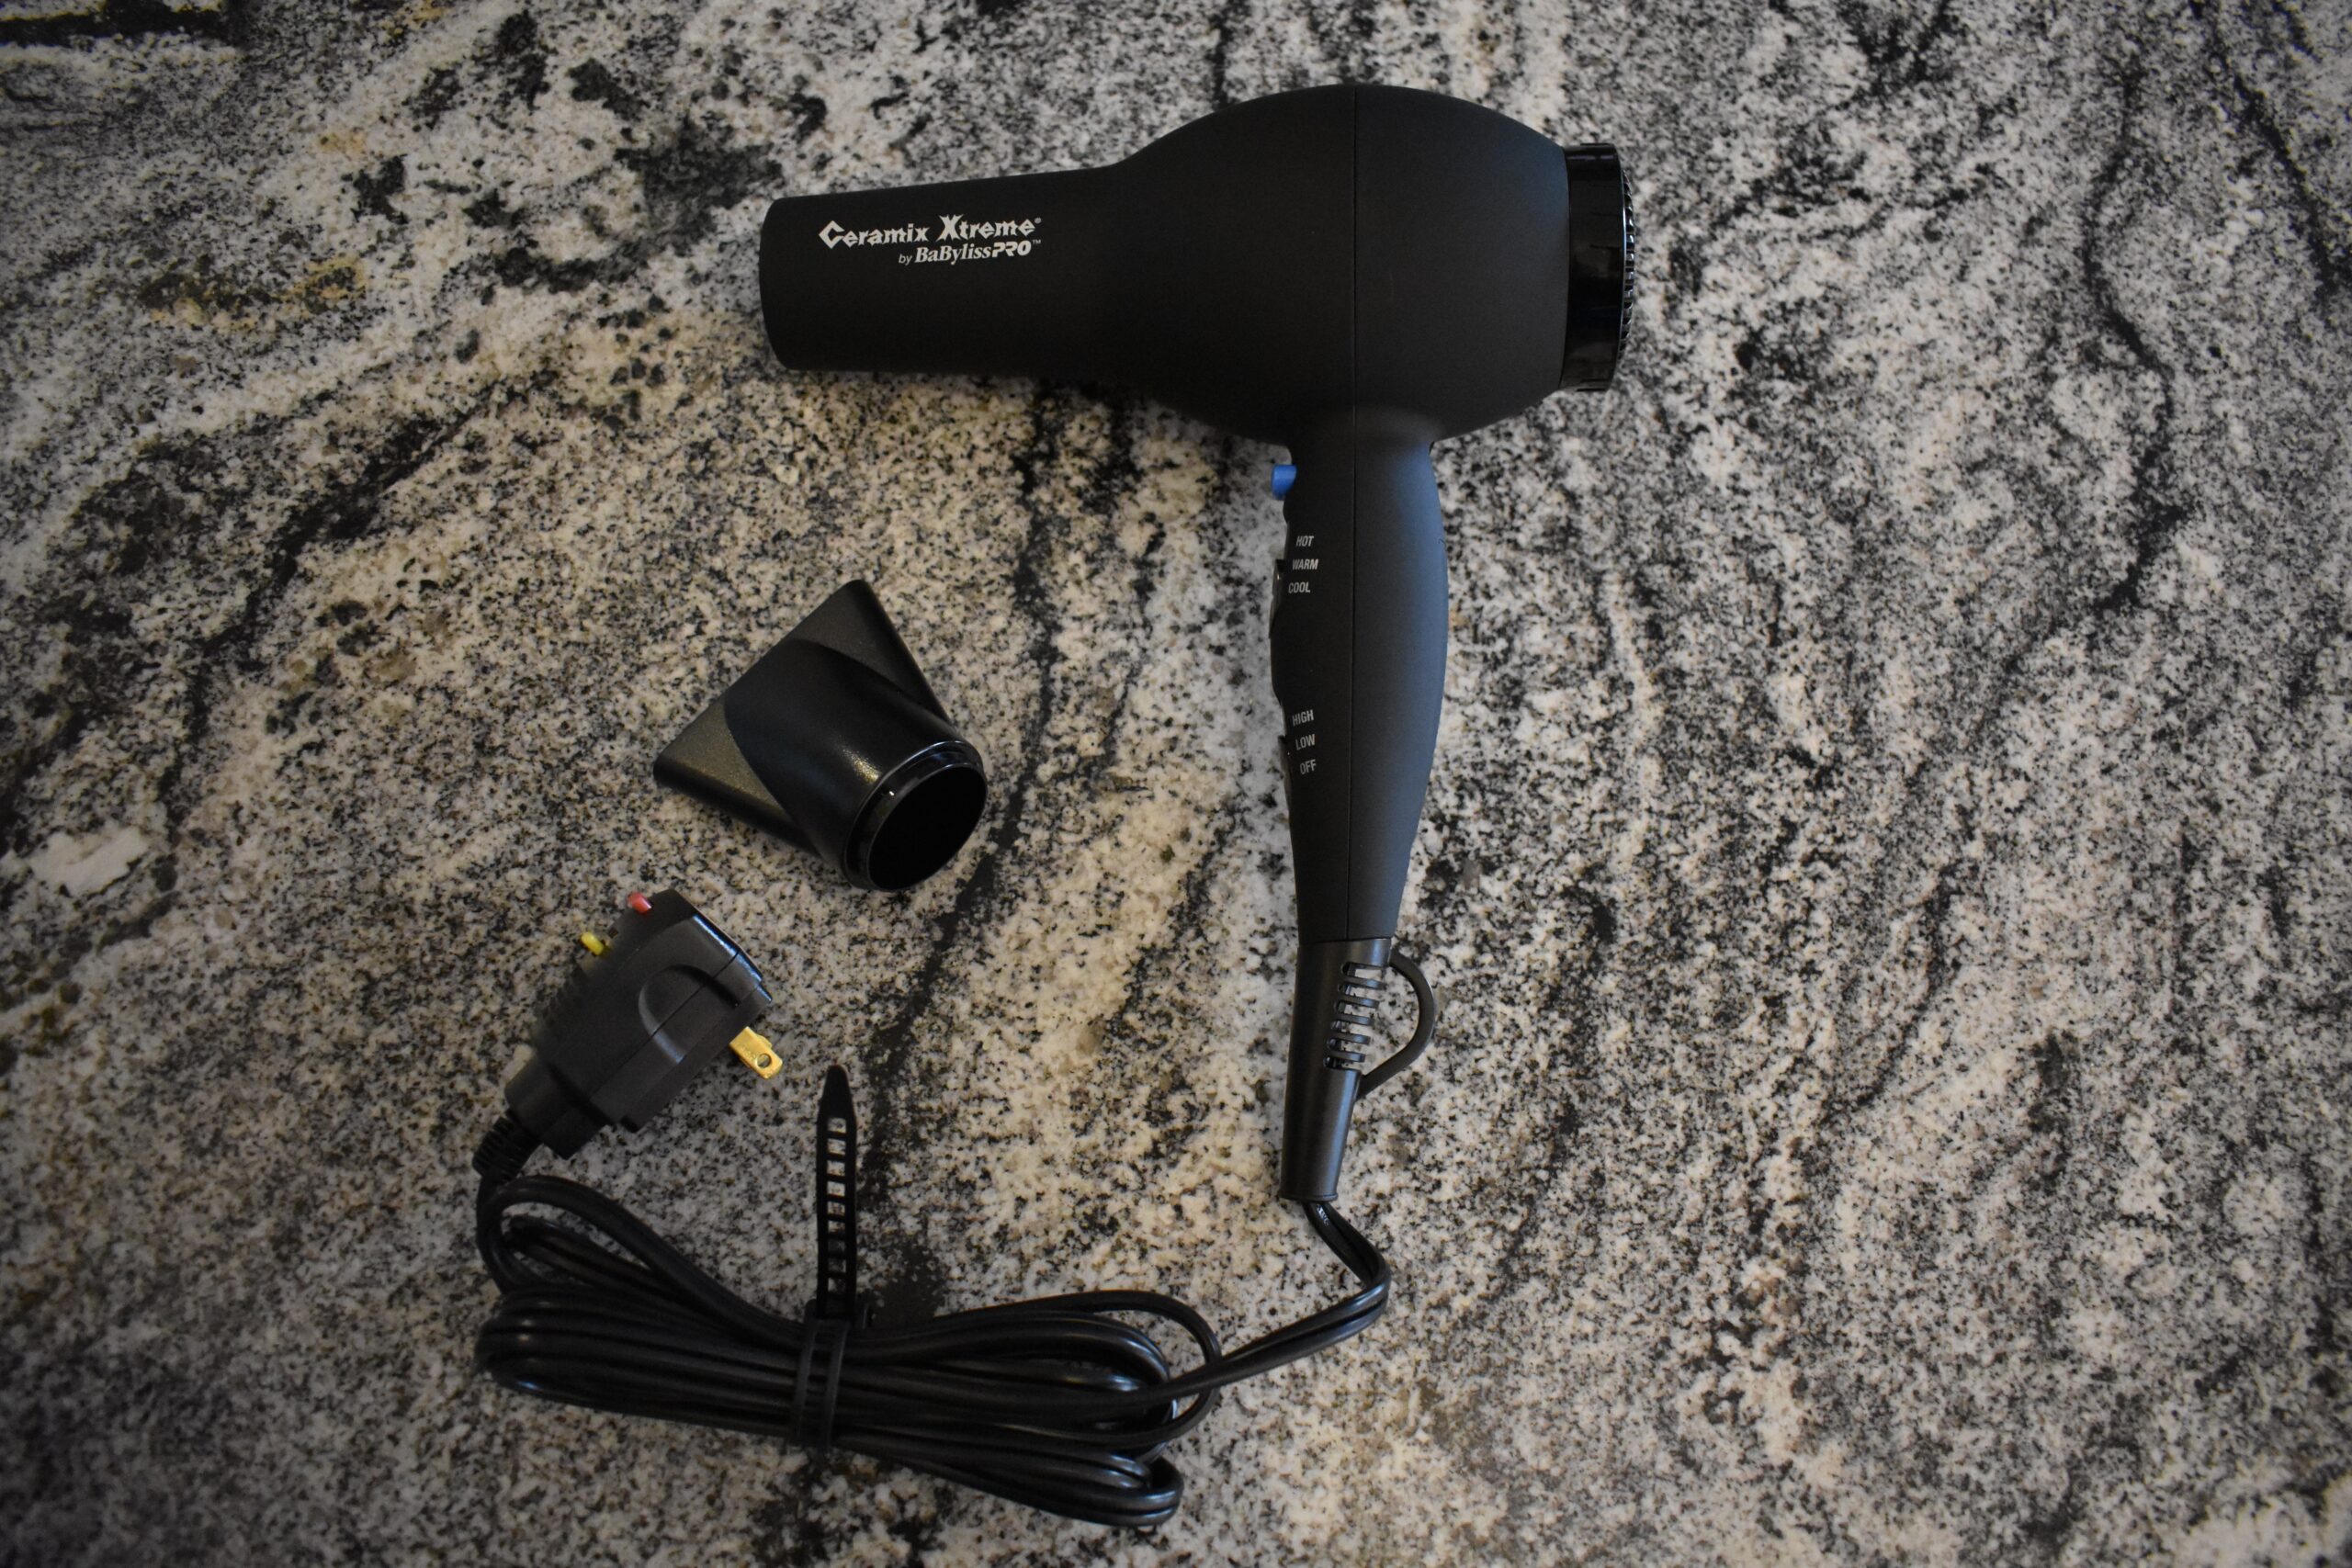 The Ceramix Xtreme by Babyliss, one of the best hair dryers